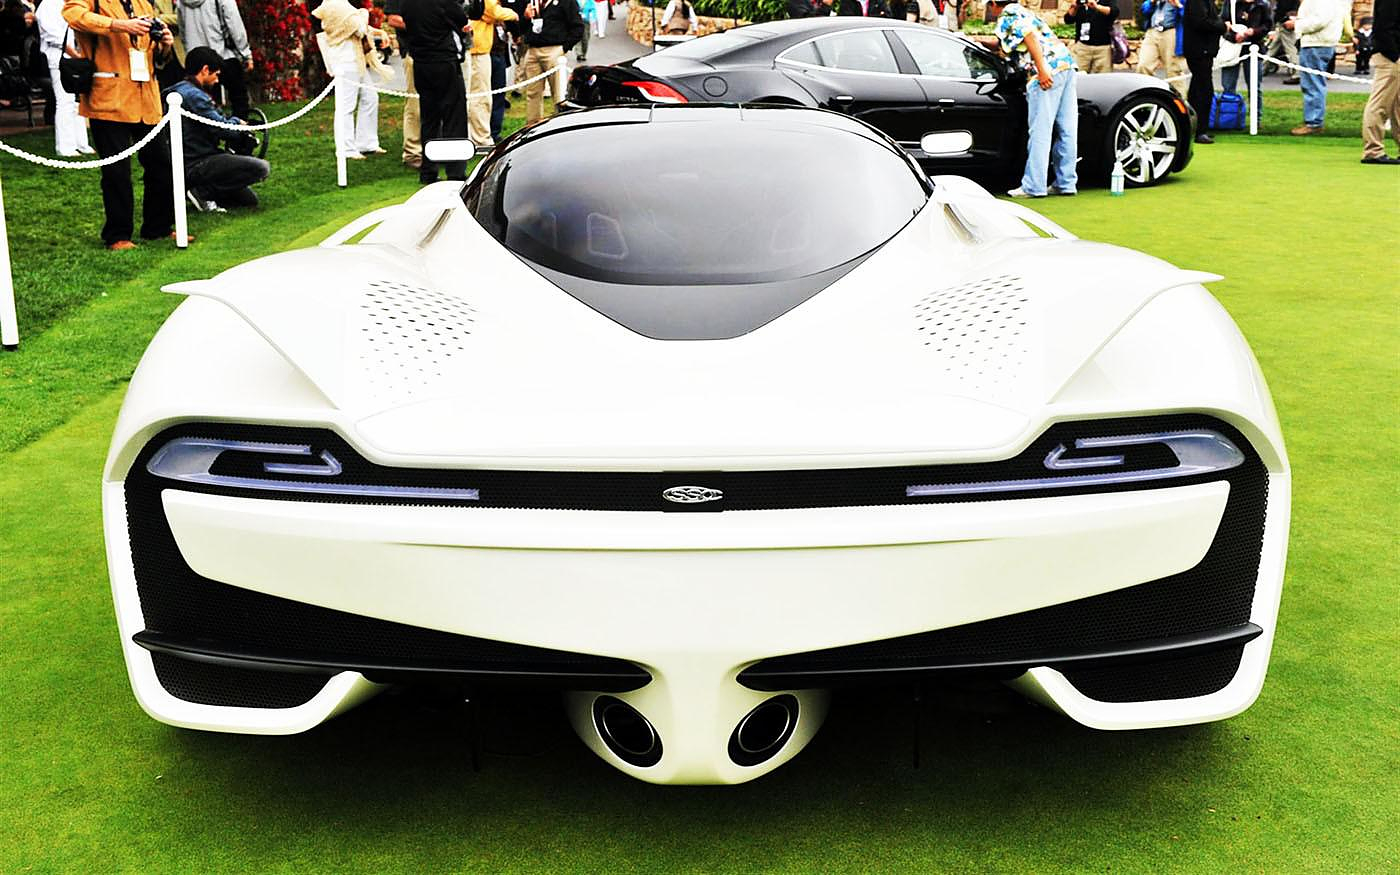 SSC Tuatara aims to be the world’s fastest car. - Design Is This